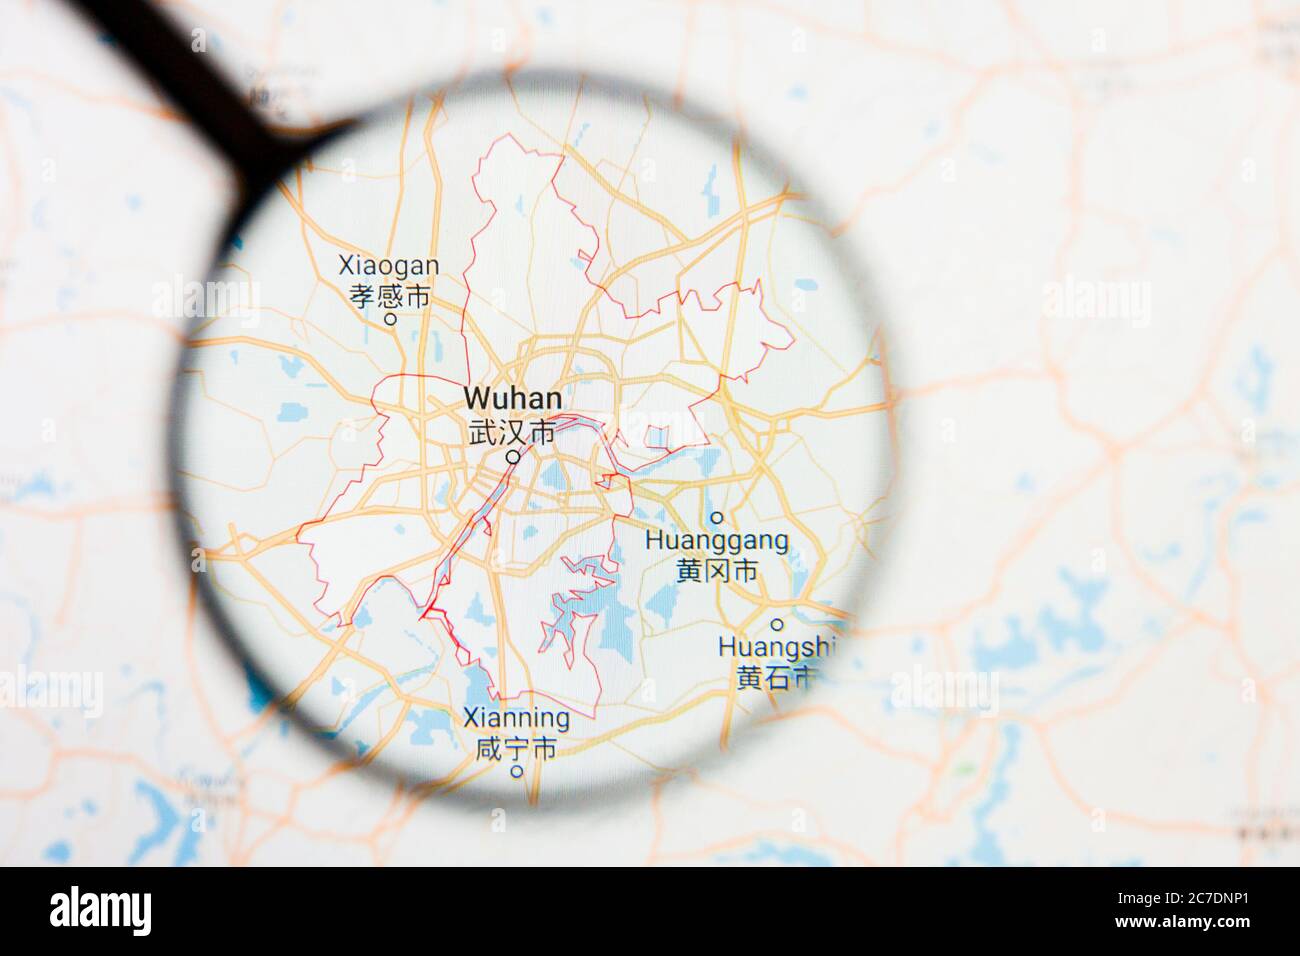 Wuhan, China city visualization illustrative concept on display screen through magnifying glass Stock Photo